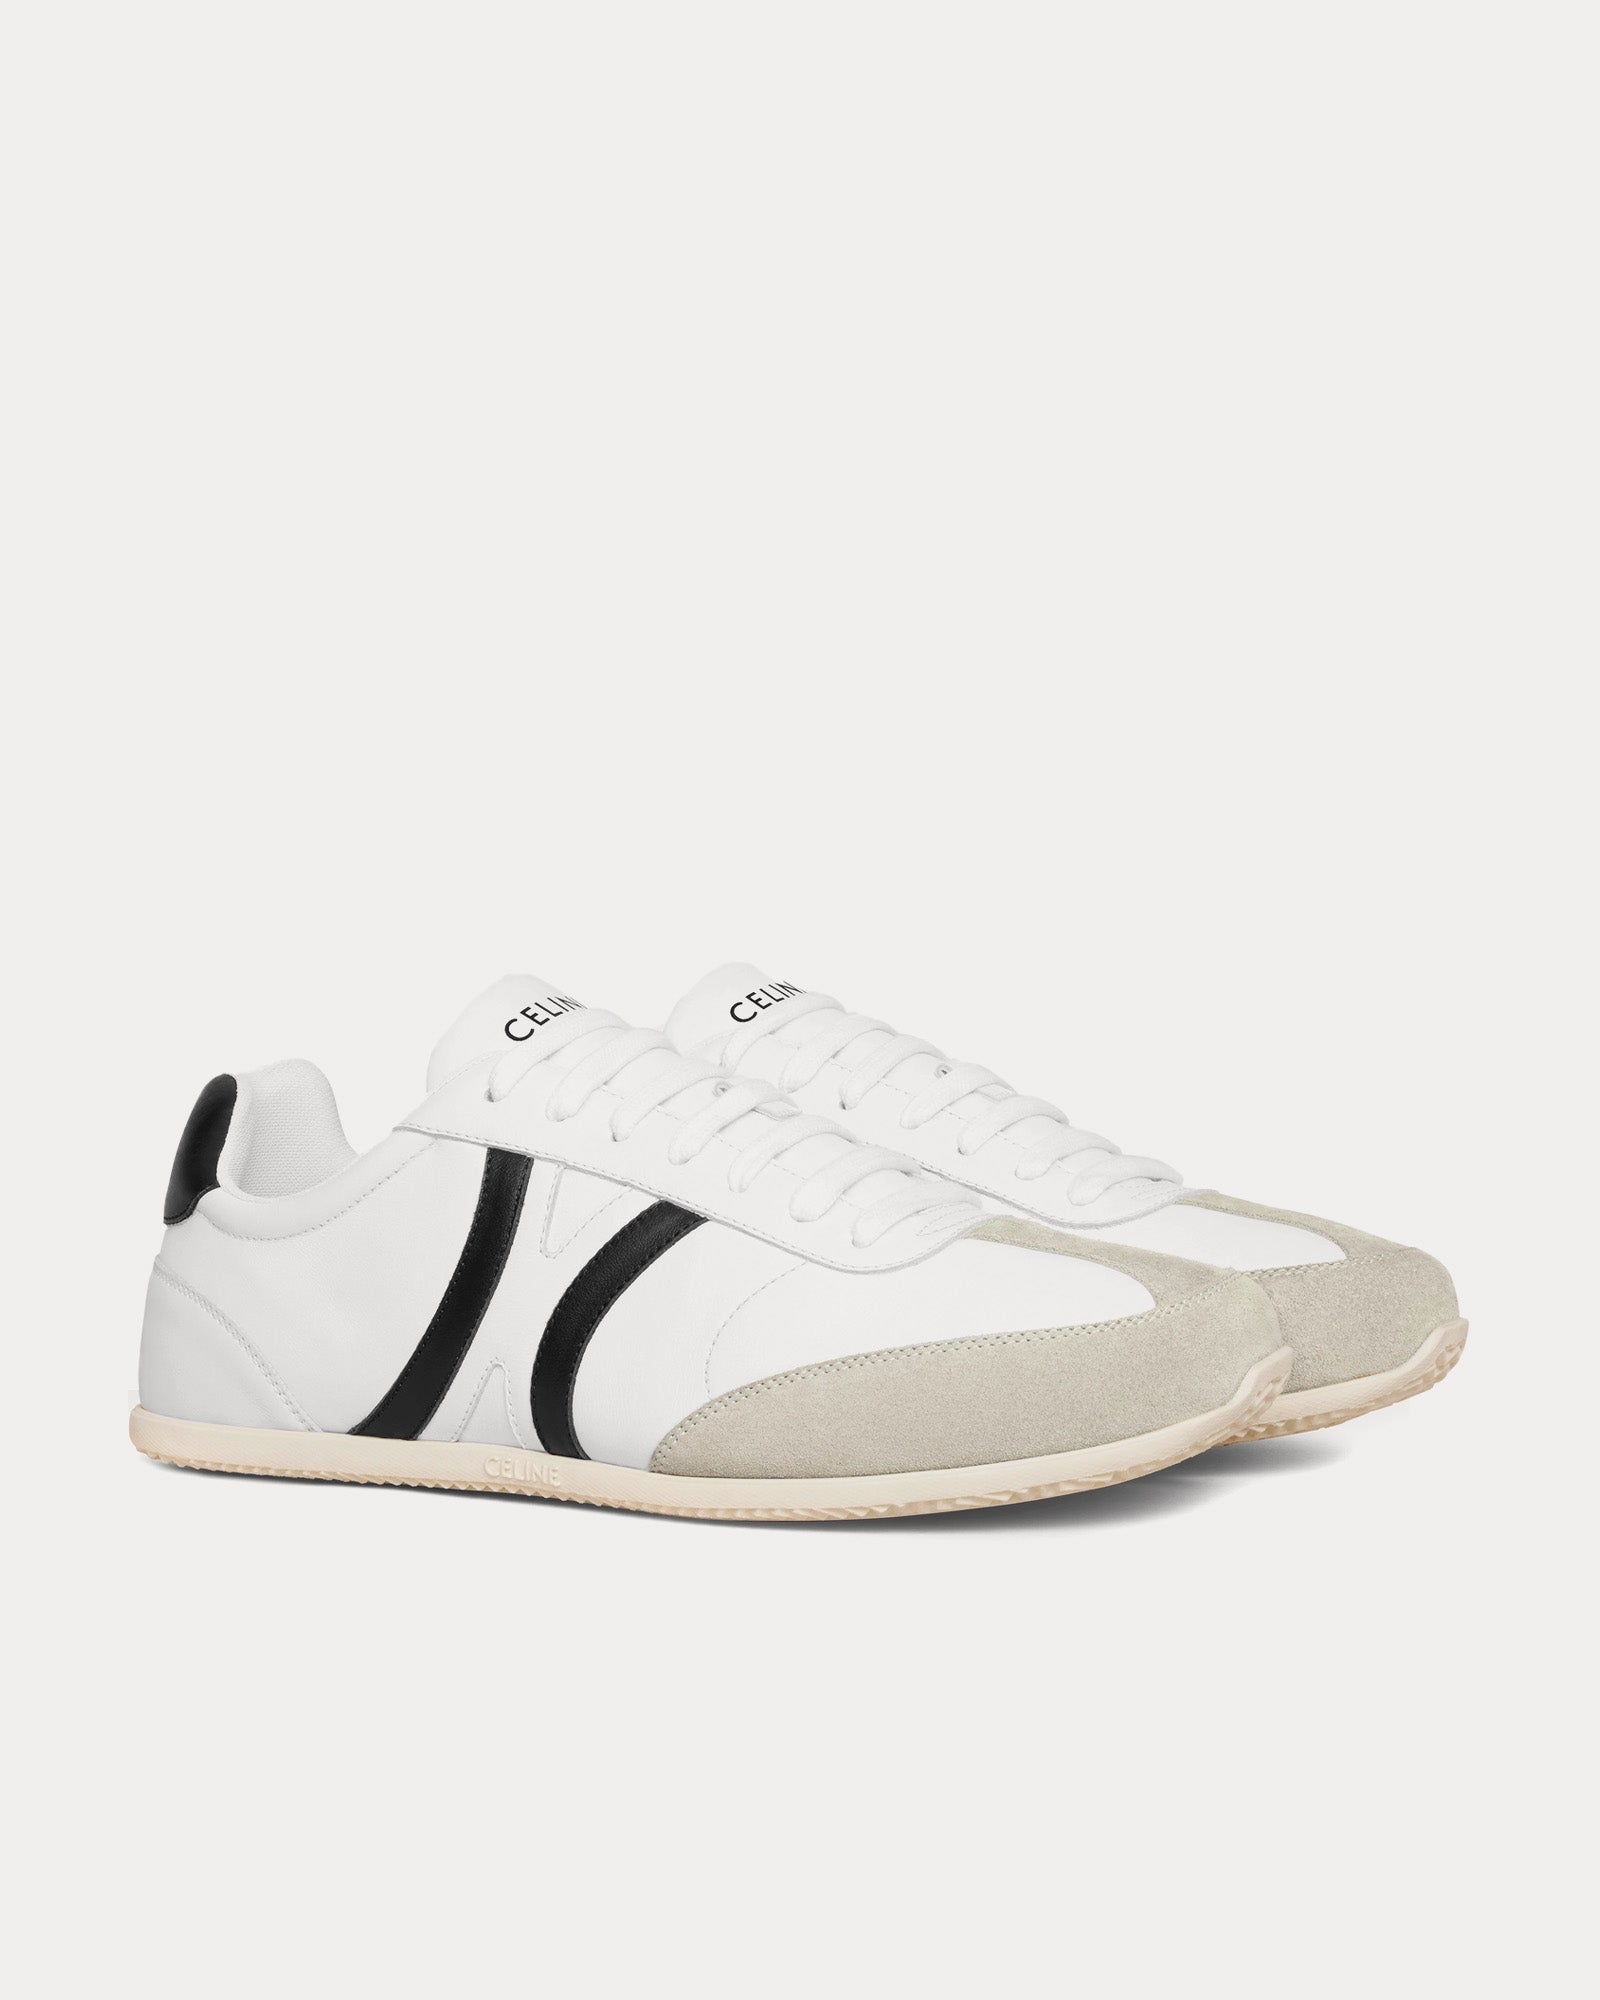 Celine - Jogger with Triomphe Signature Optic White / Grey / Black Low Top Sneakers